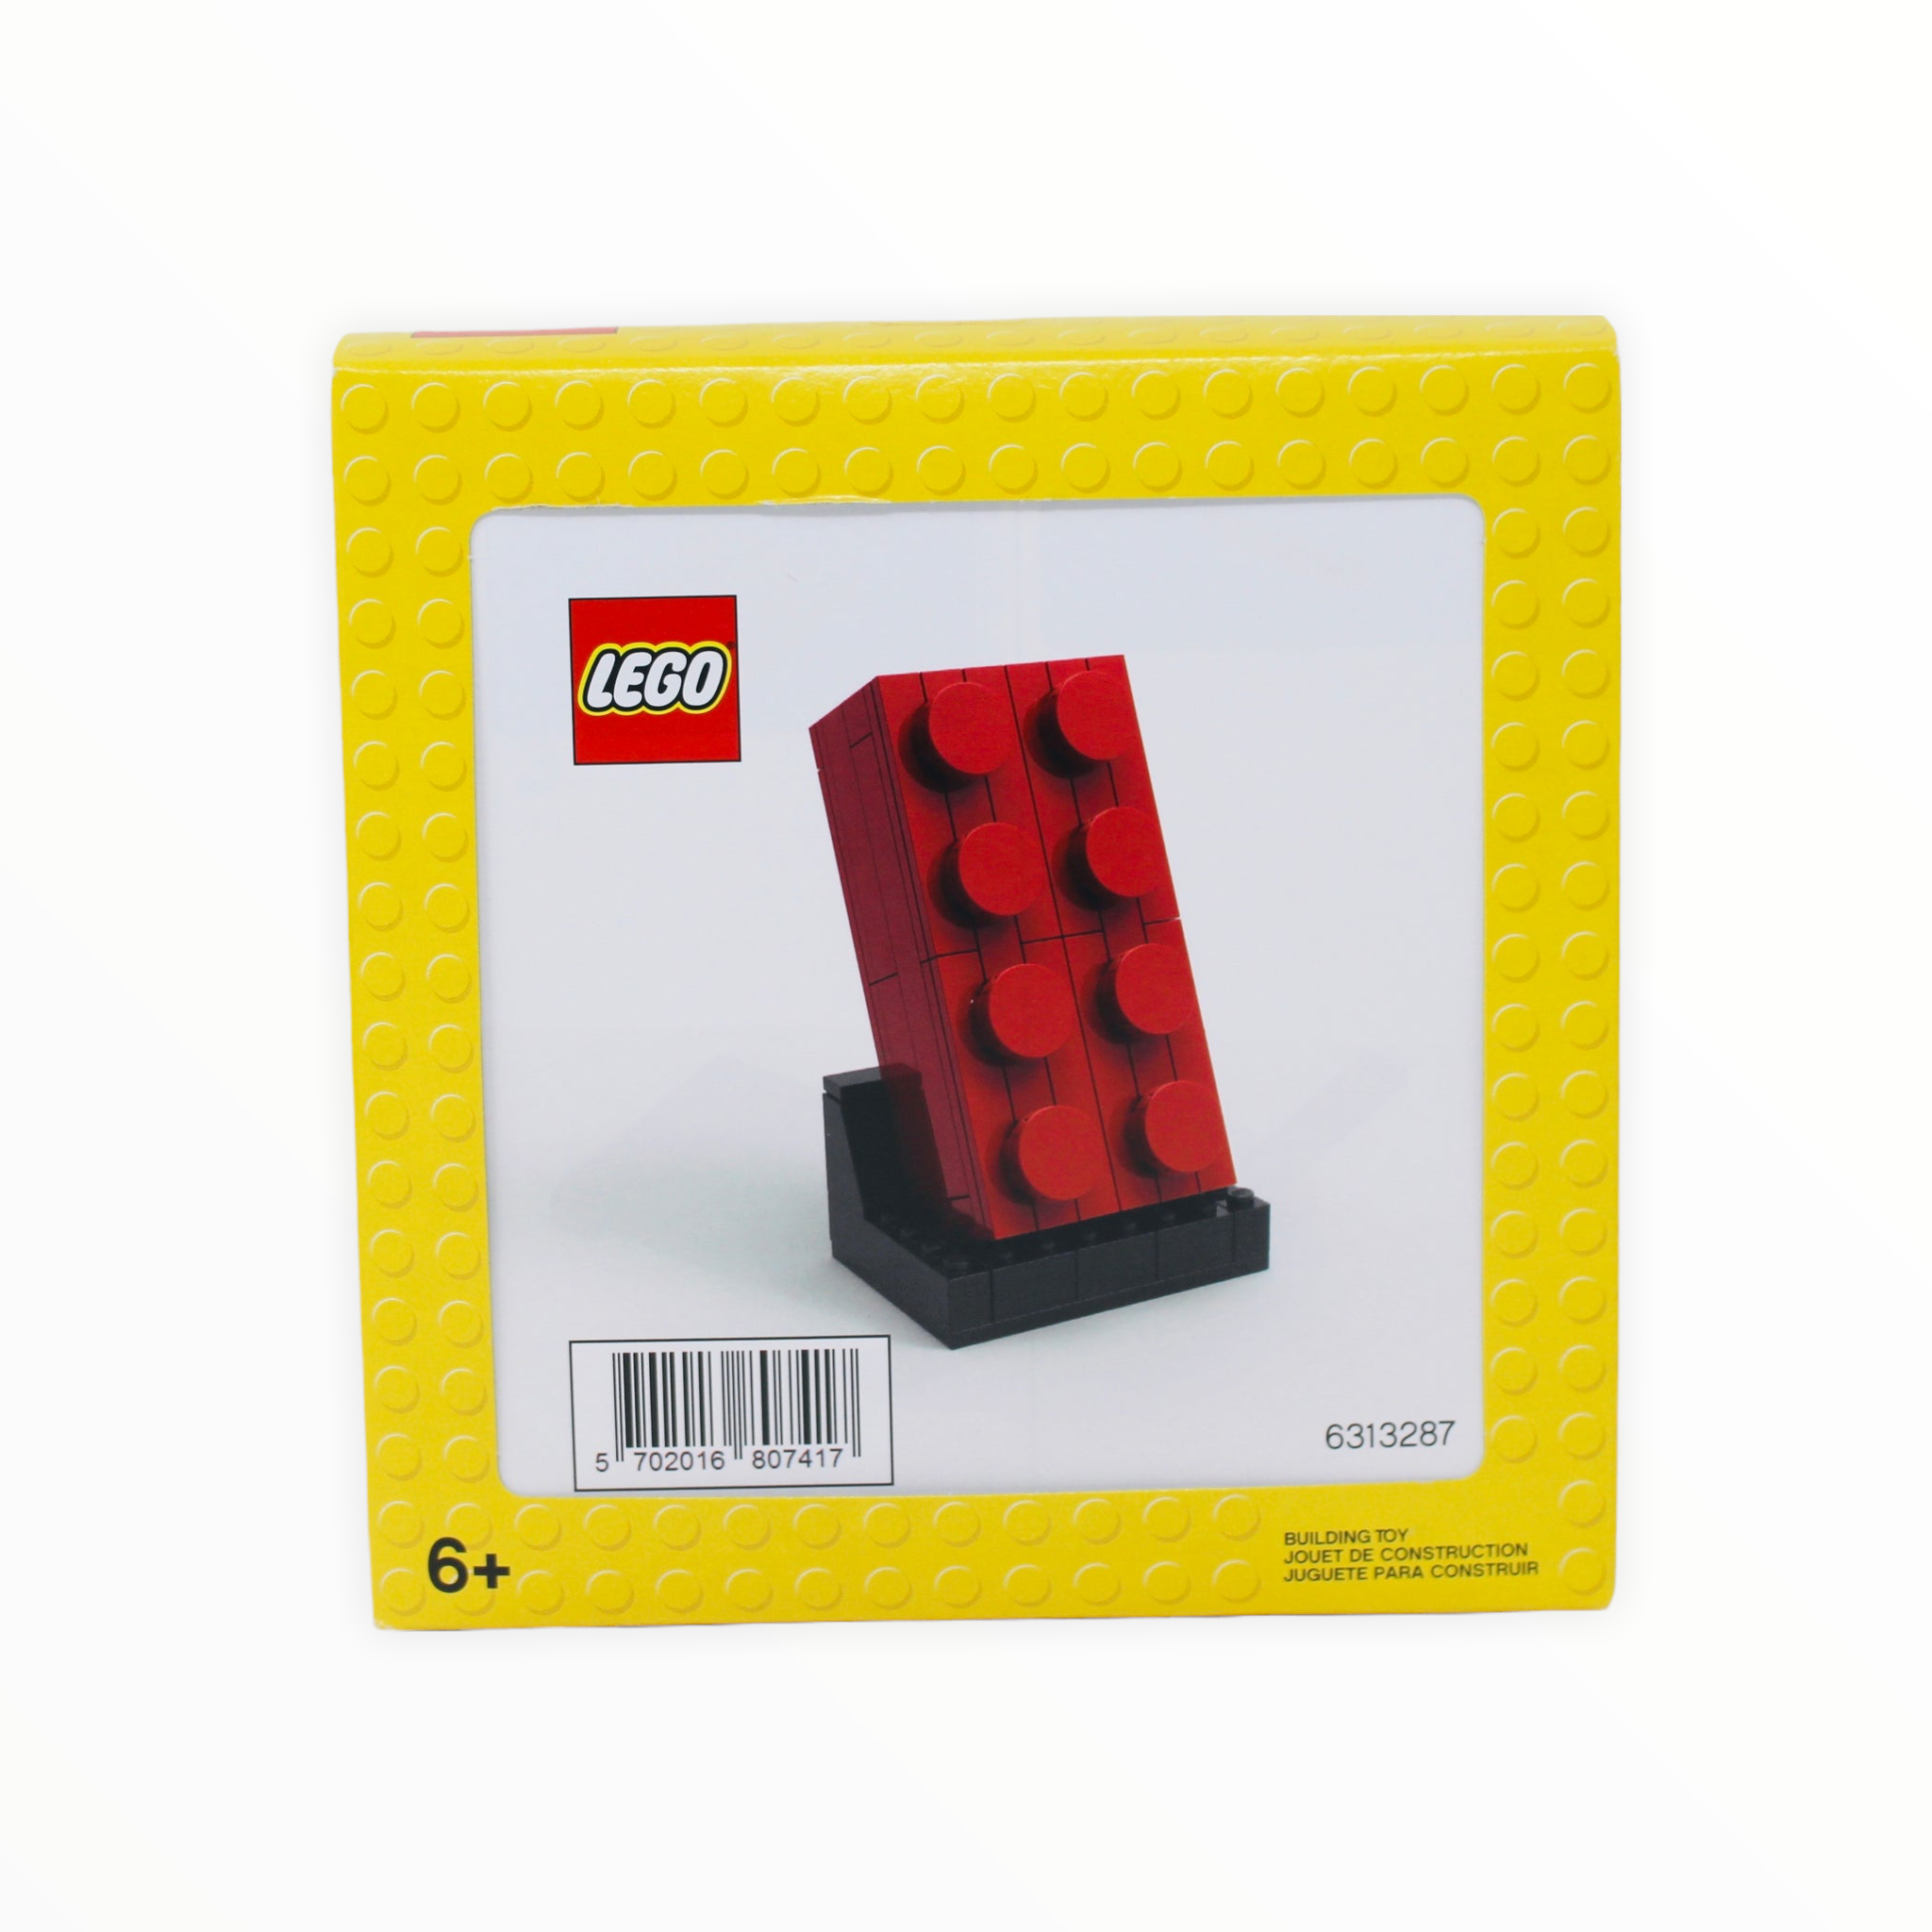 Retired Set 6313287 LEGO Buildable 2x4 Red Brick